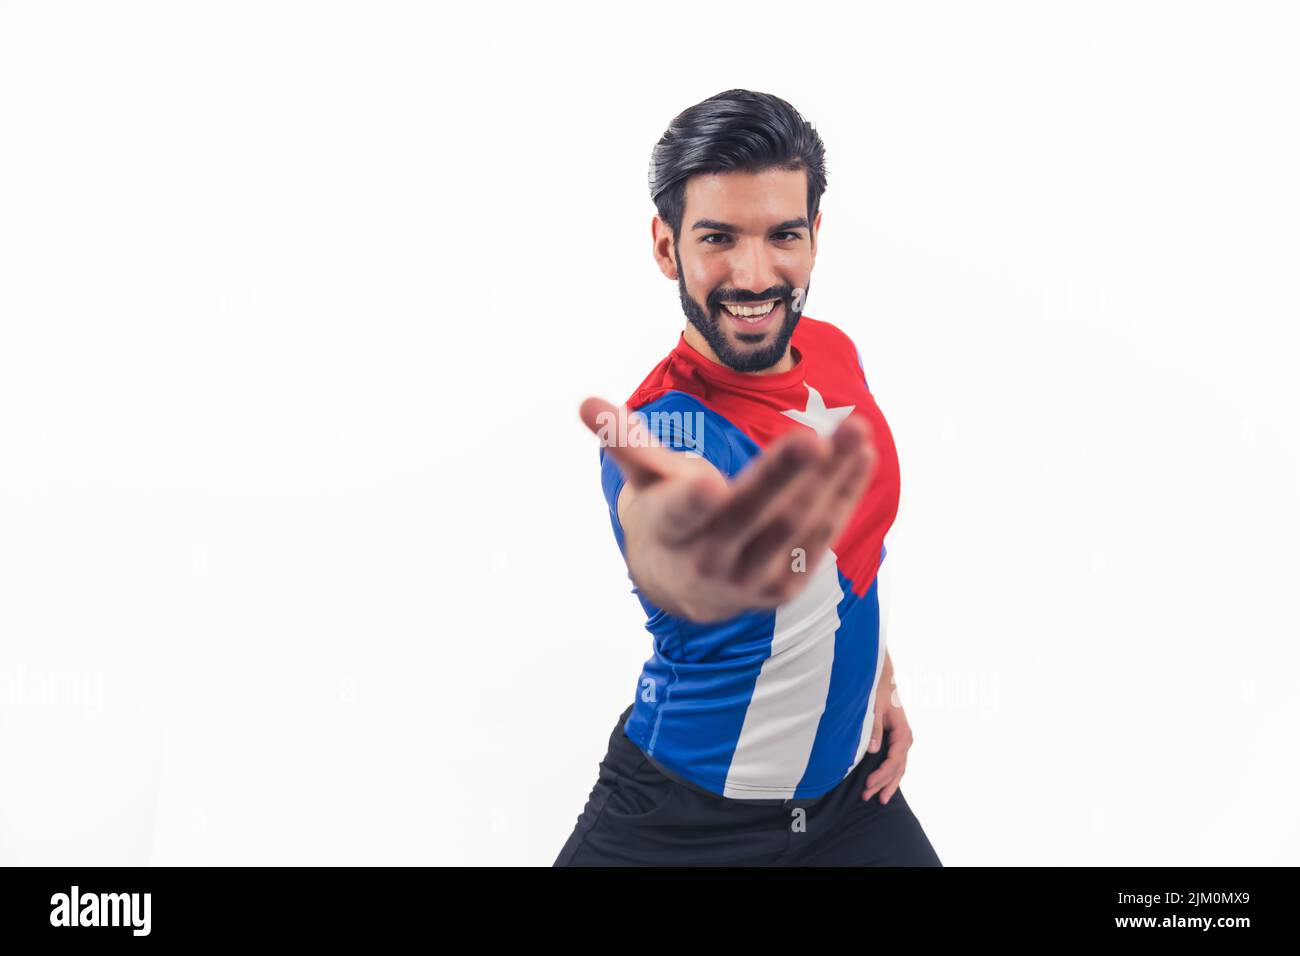 Hispanic man with dark hair and beard wide smile looking into camera wearing puero rico flag t-shirt extended arm inviting to dance. Studio shot. Isolated copy space. High quality photo Stock Photo